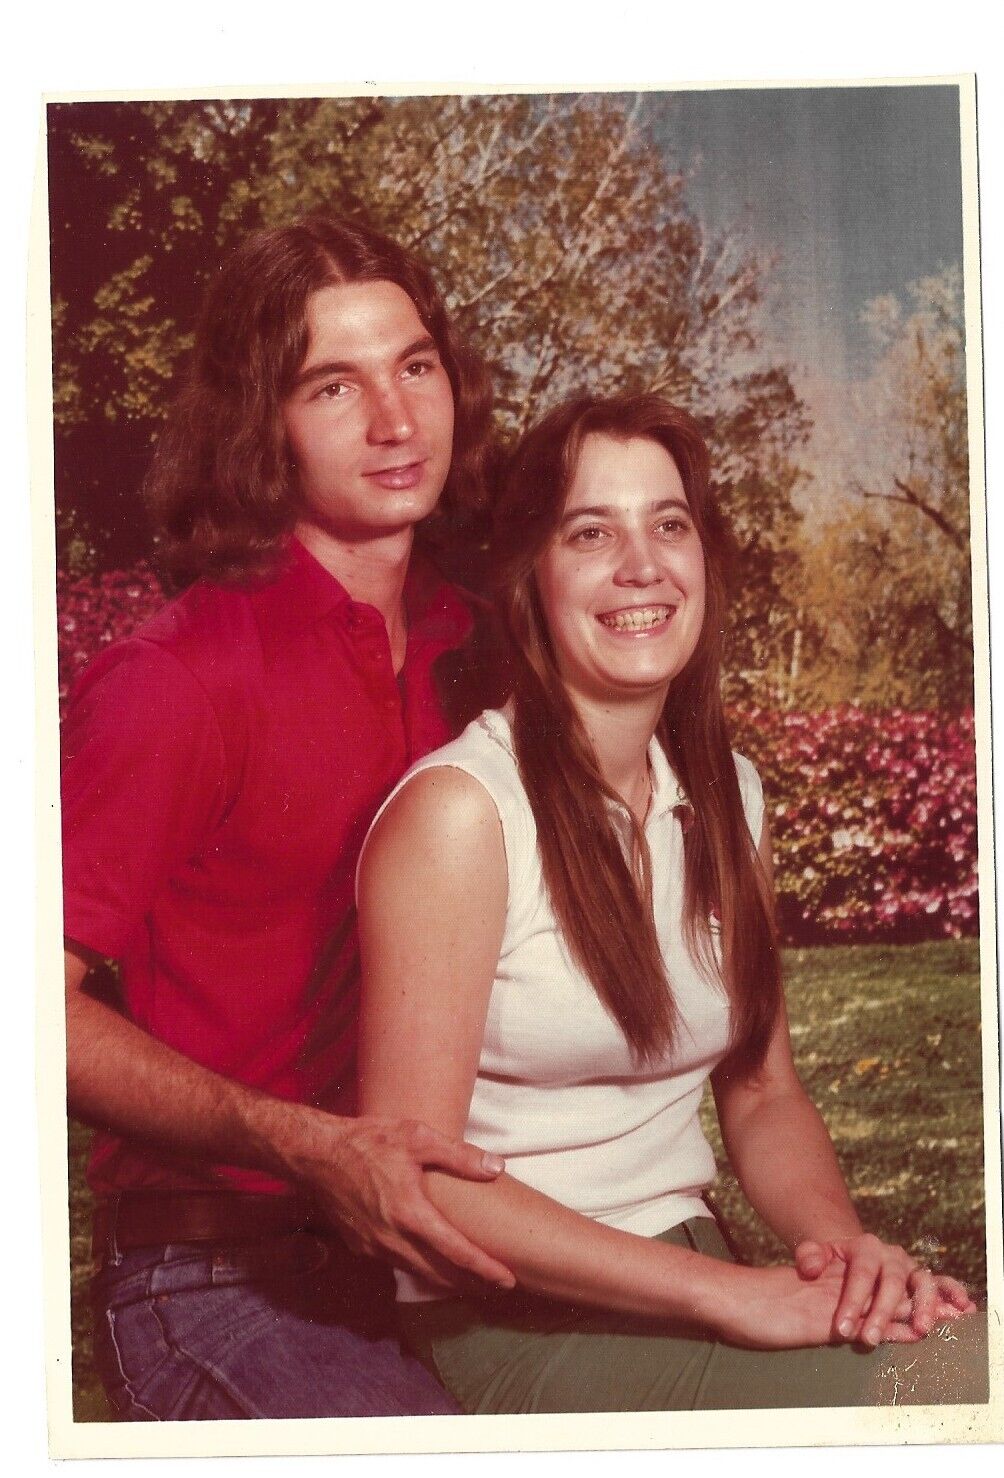 Vintage 1980s FOUND Sears PHOTO LONG HAIRED MAN + PRETTY YOUNG WOMAN IN LOVE